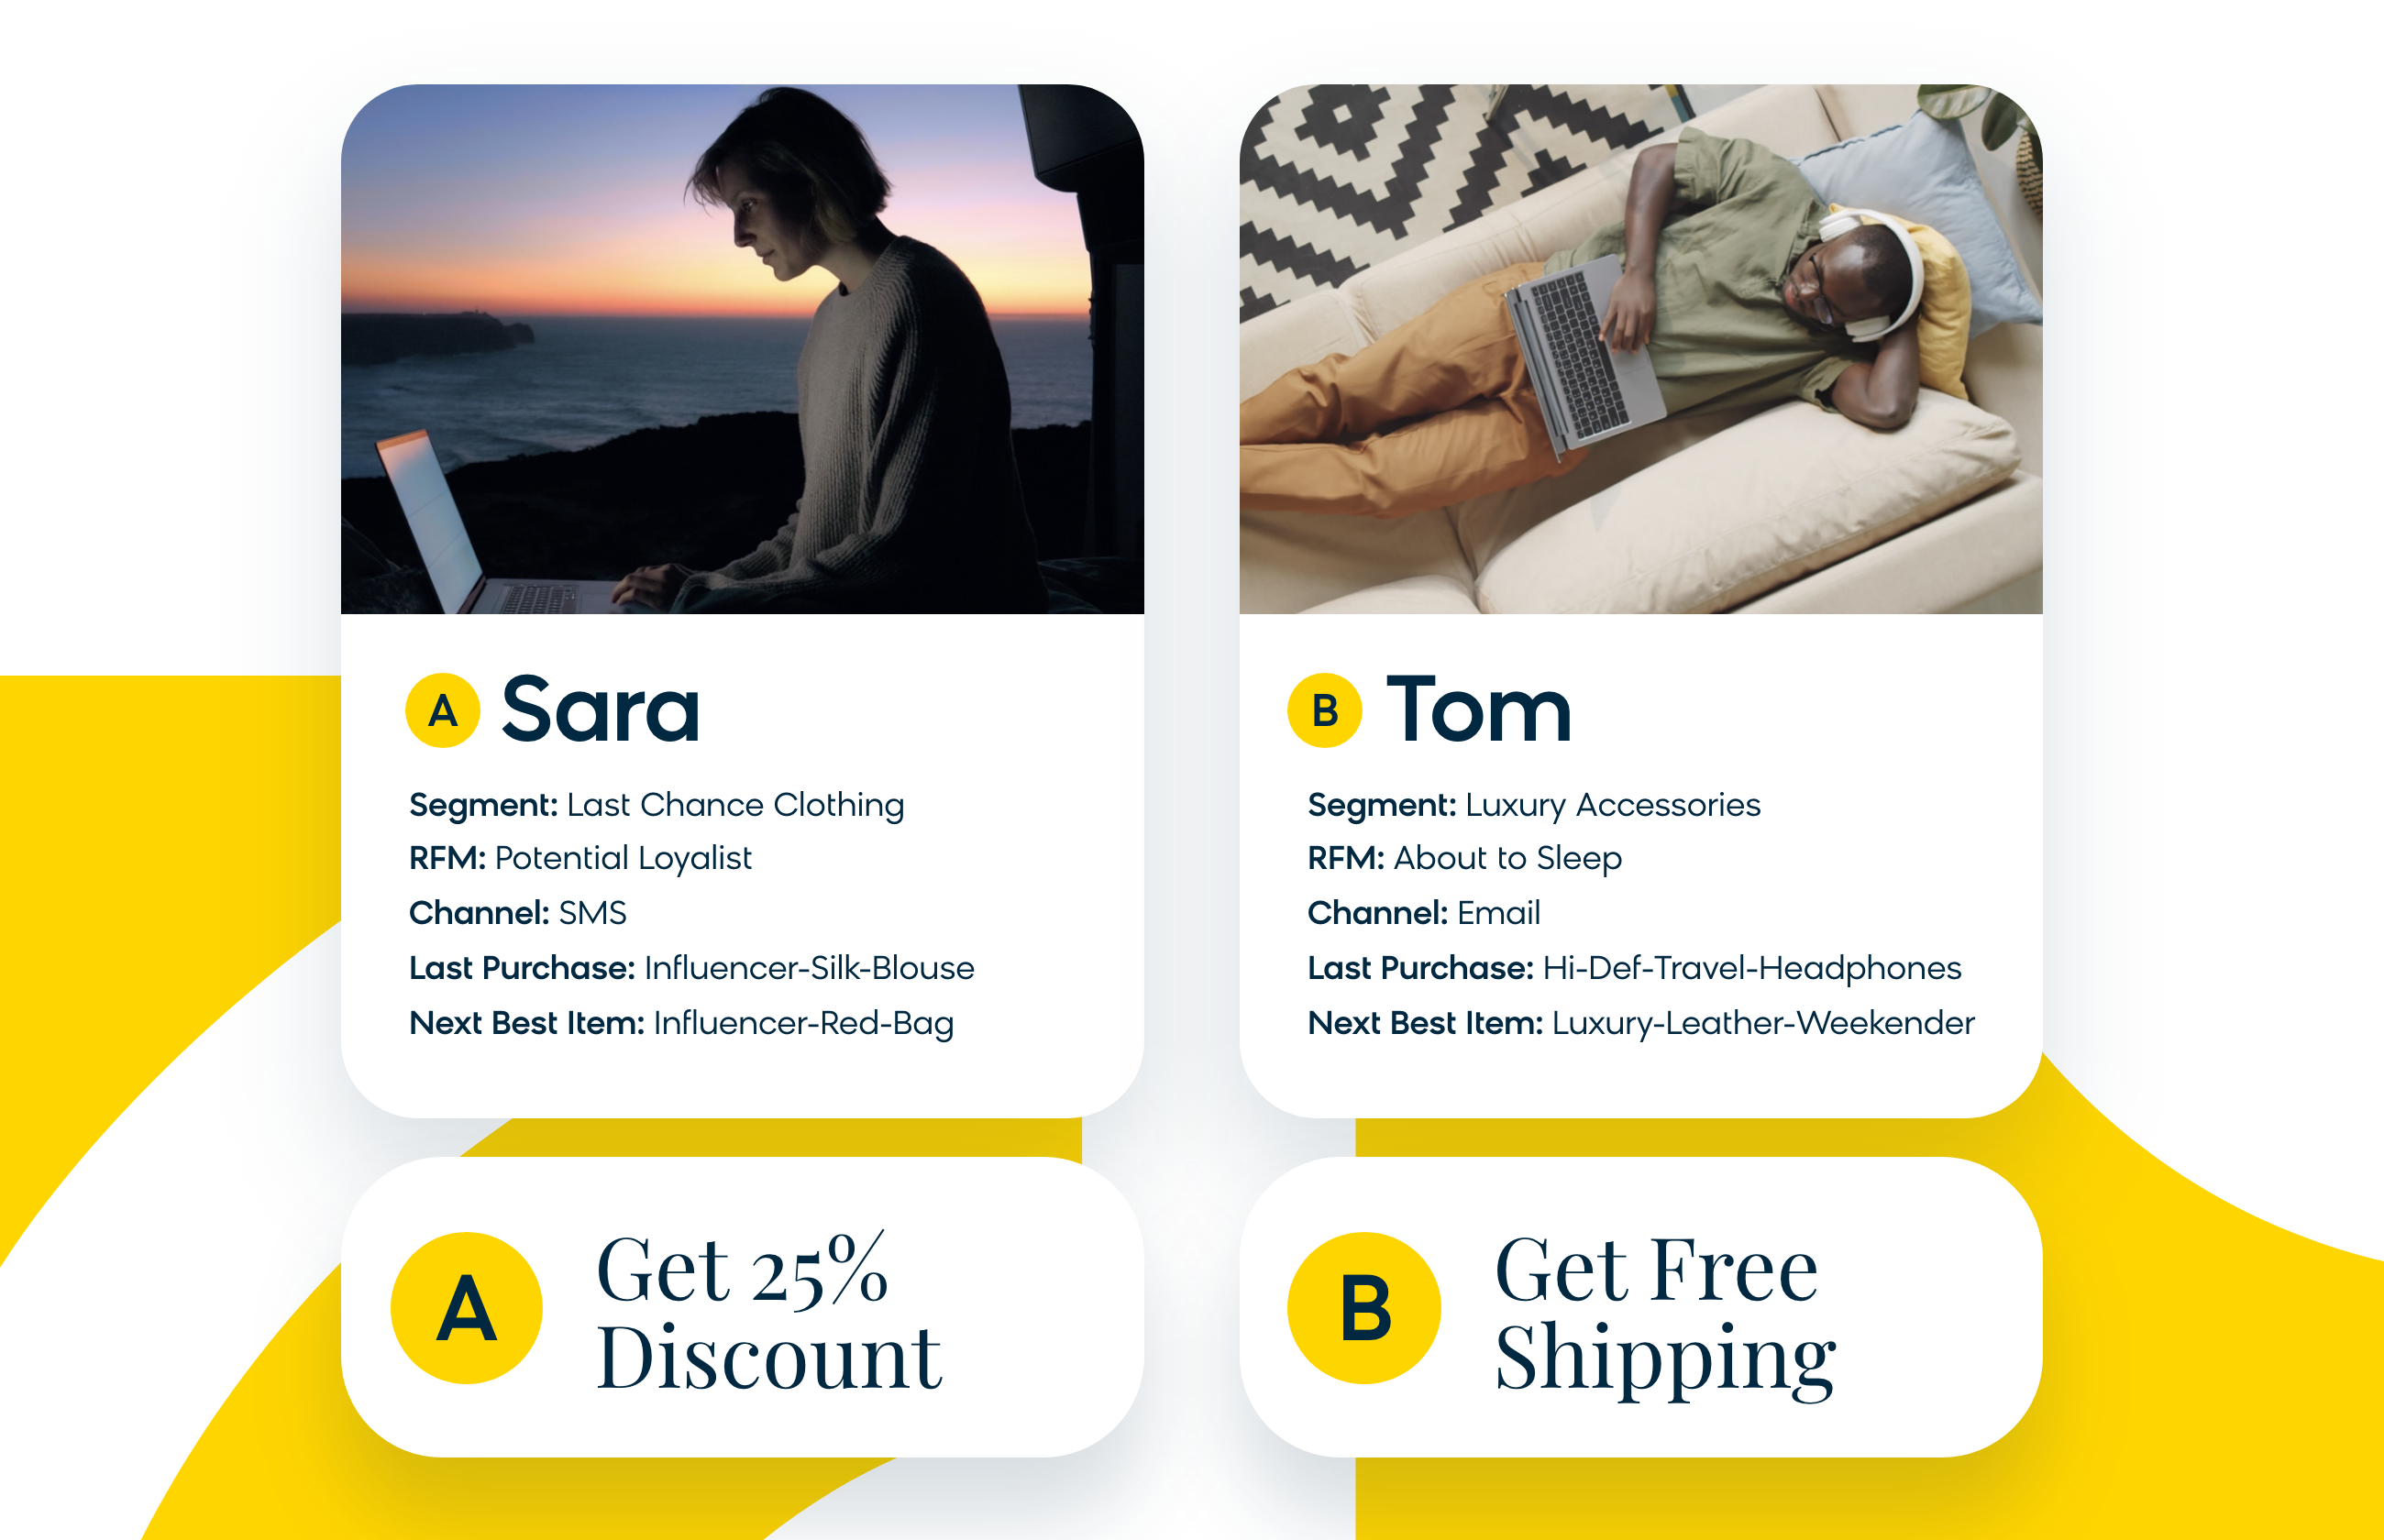 Two promotional offers for different customers utilizing contextual personalization